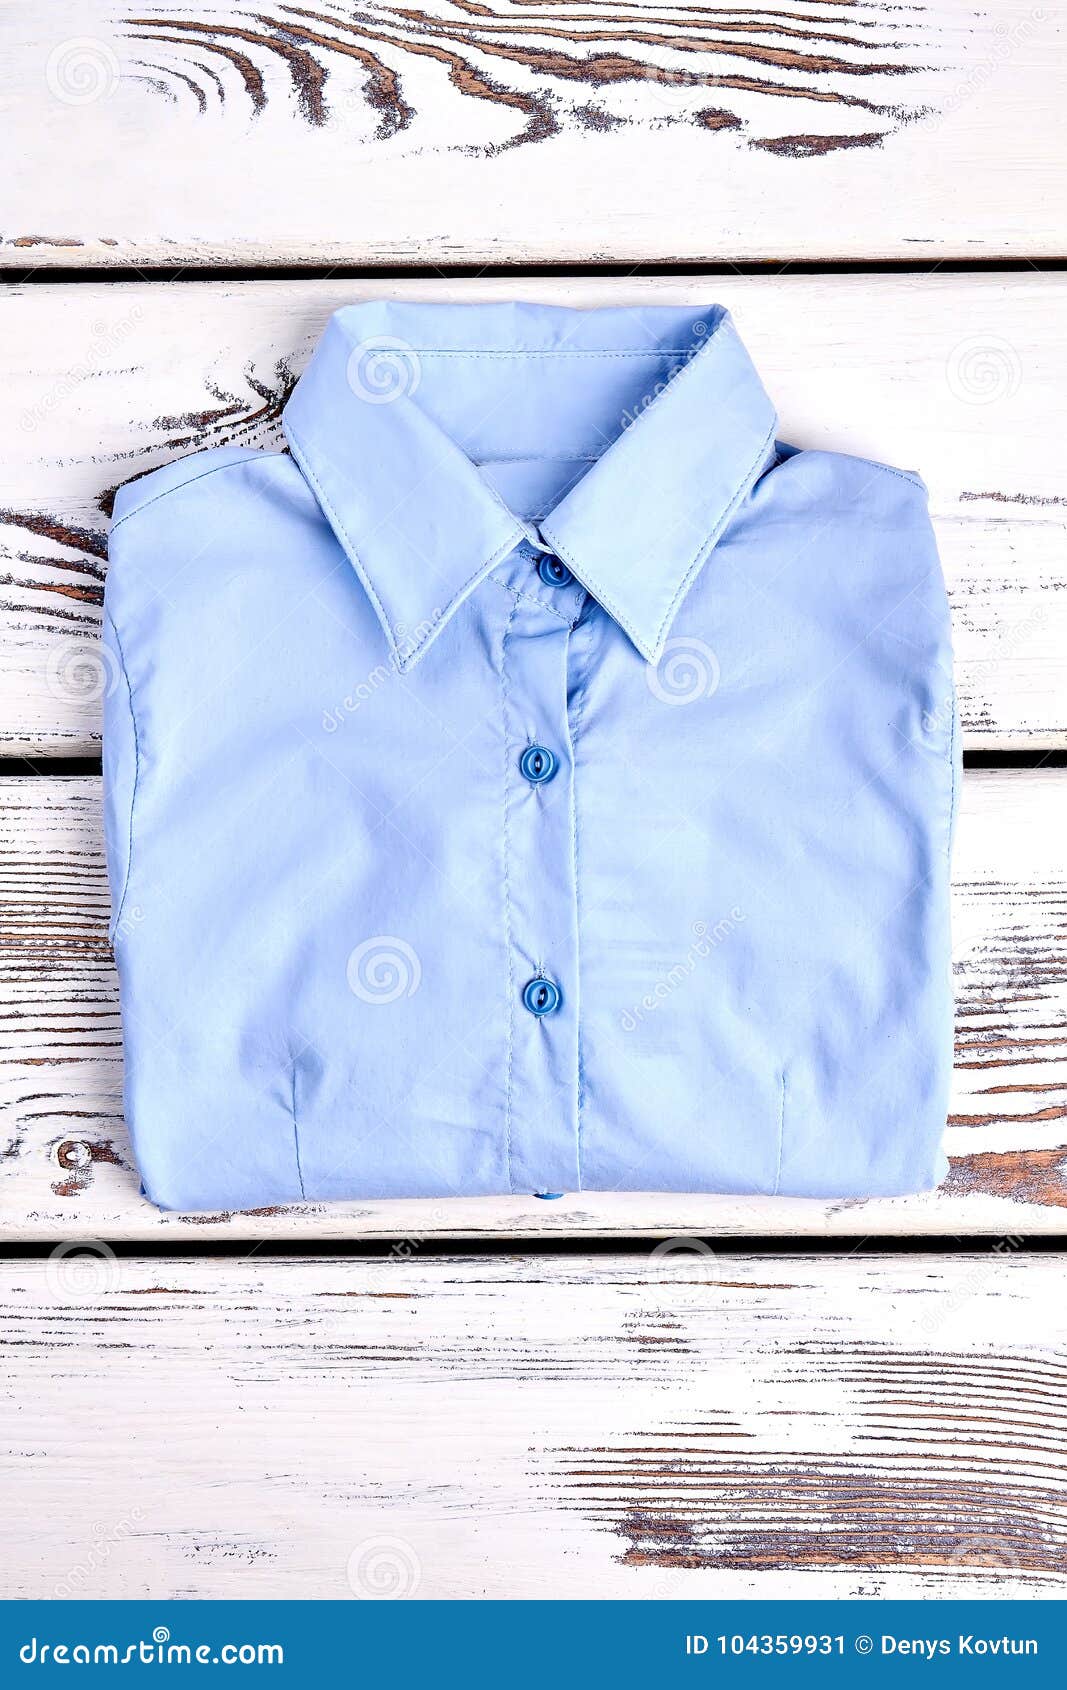 New Folded Buttoned Shirt for Girls. Stock Image - Image of folded ...